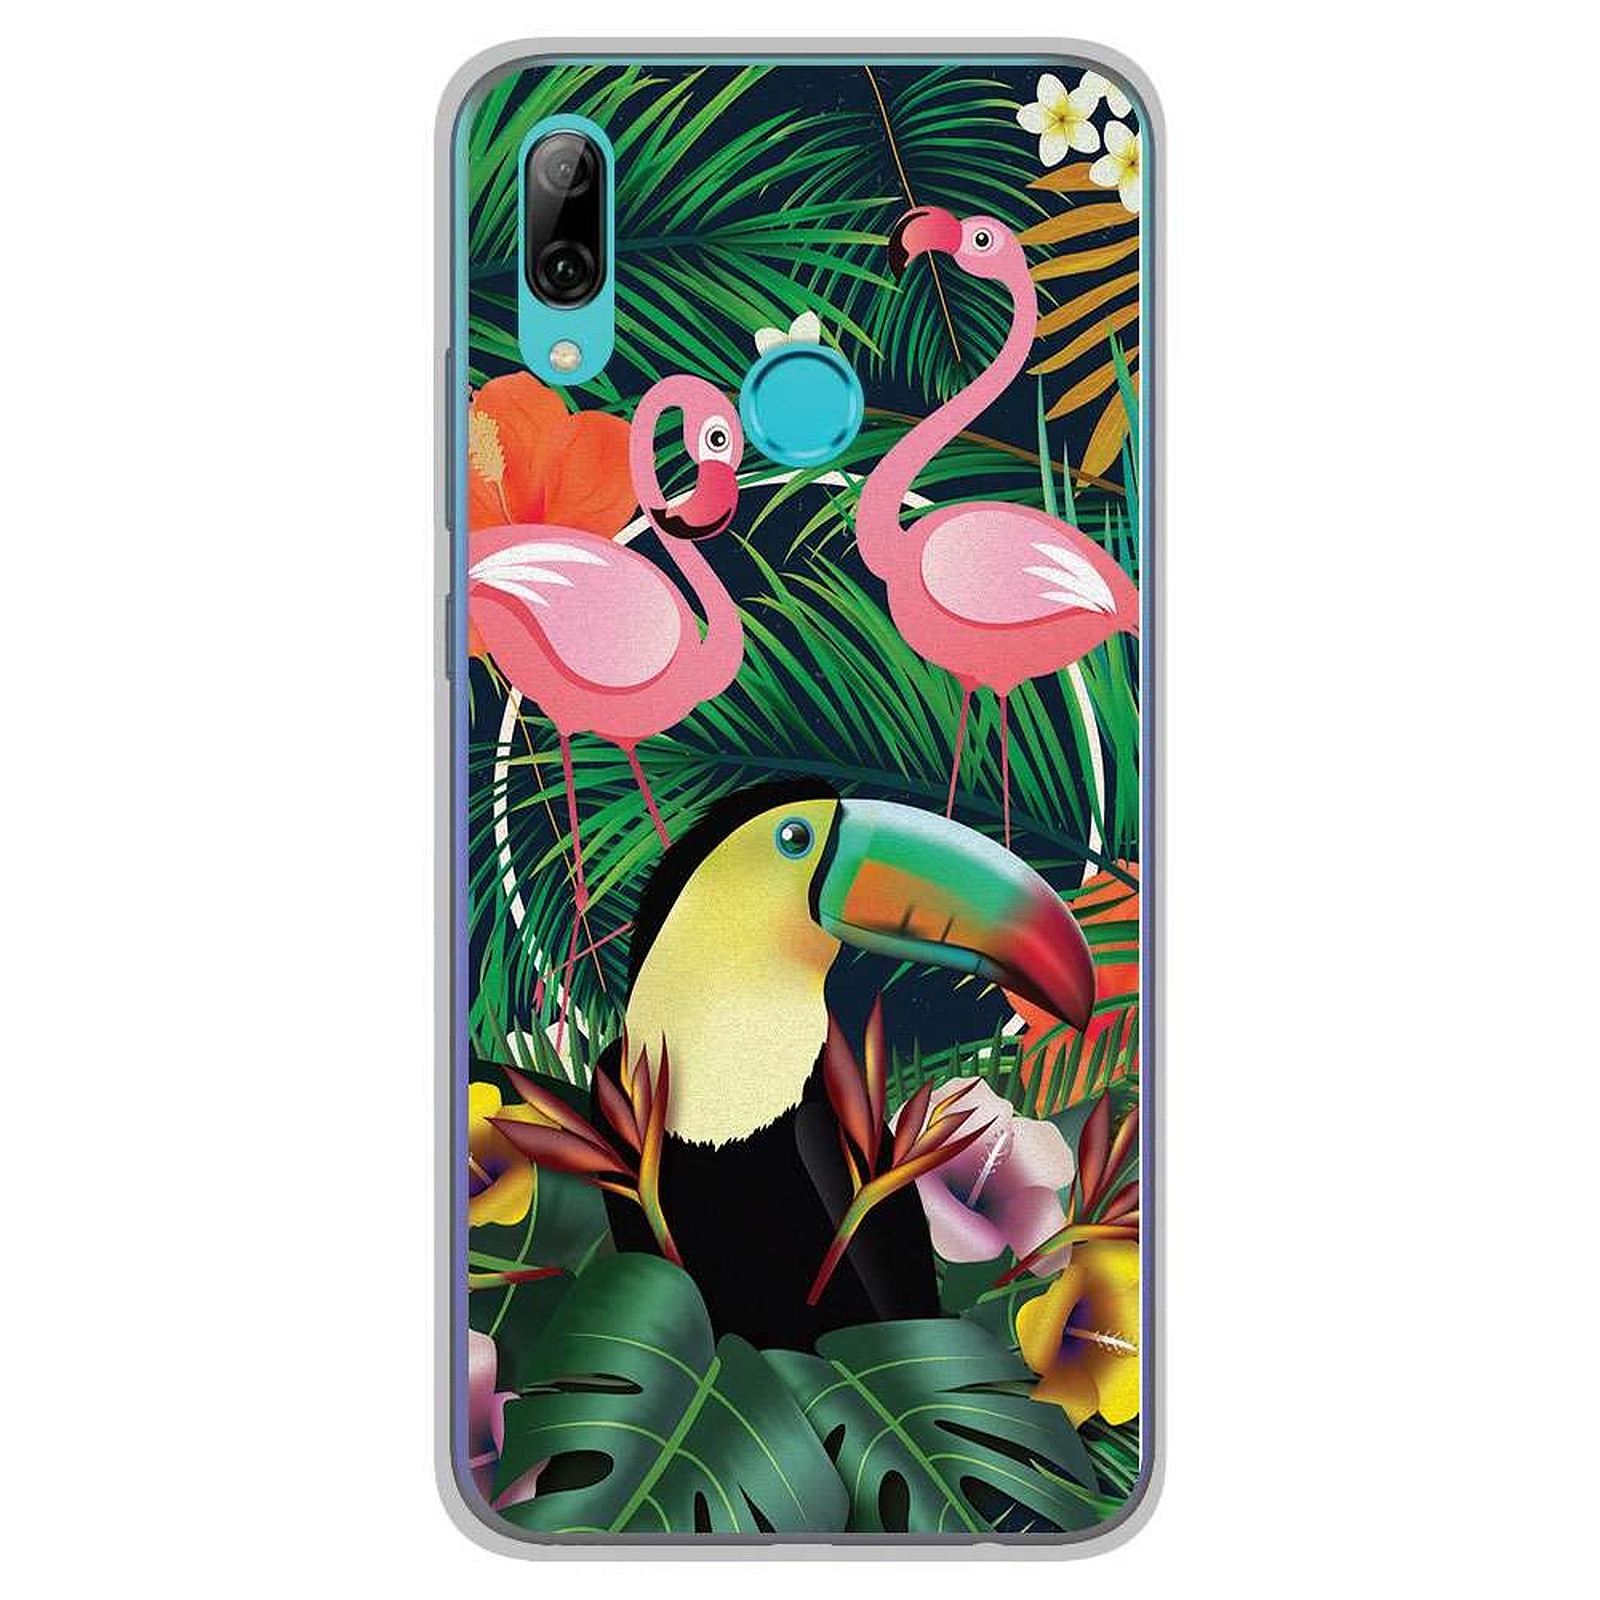 1001 Coques Coque silicone gel Huawei P Smart 2019 motif Tropical Toucan - Coque telephone 1001Coques